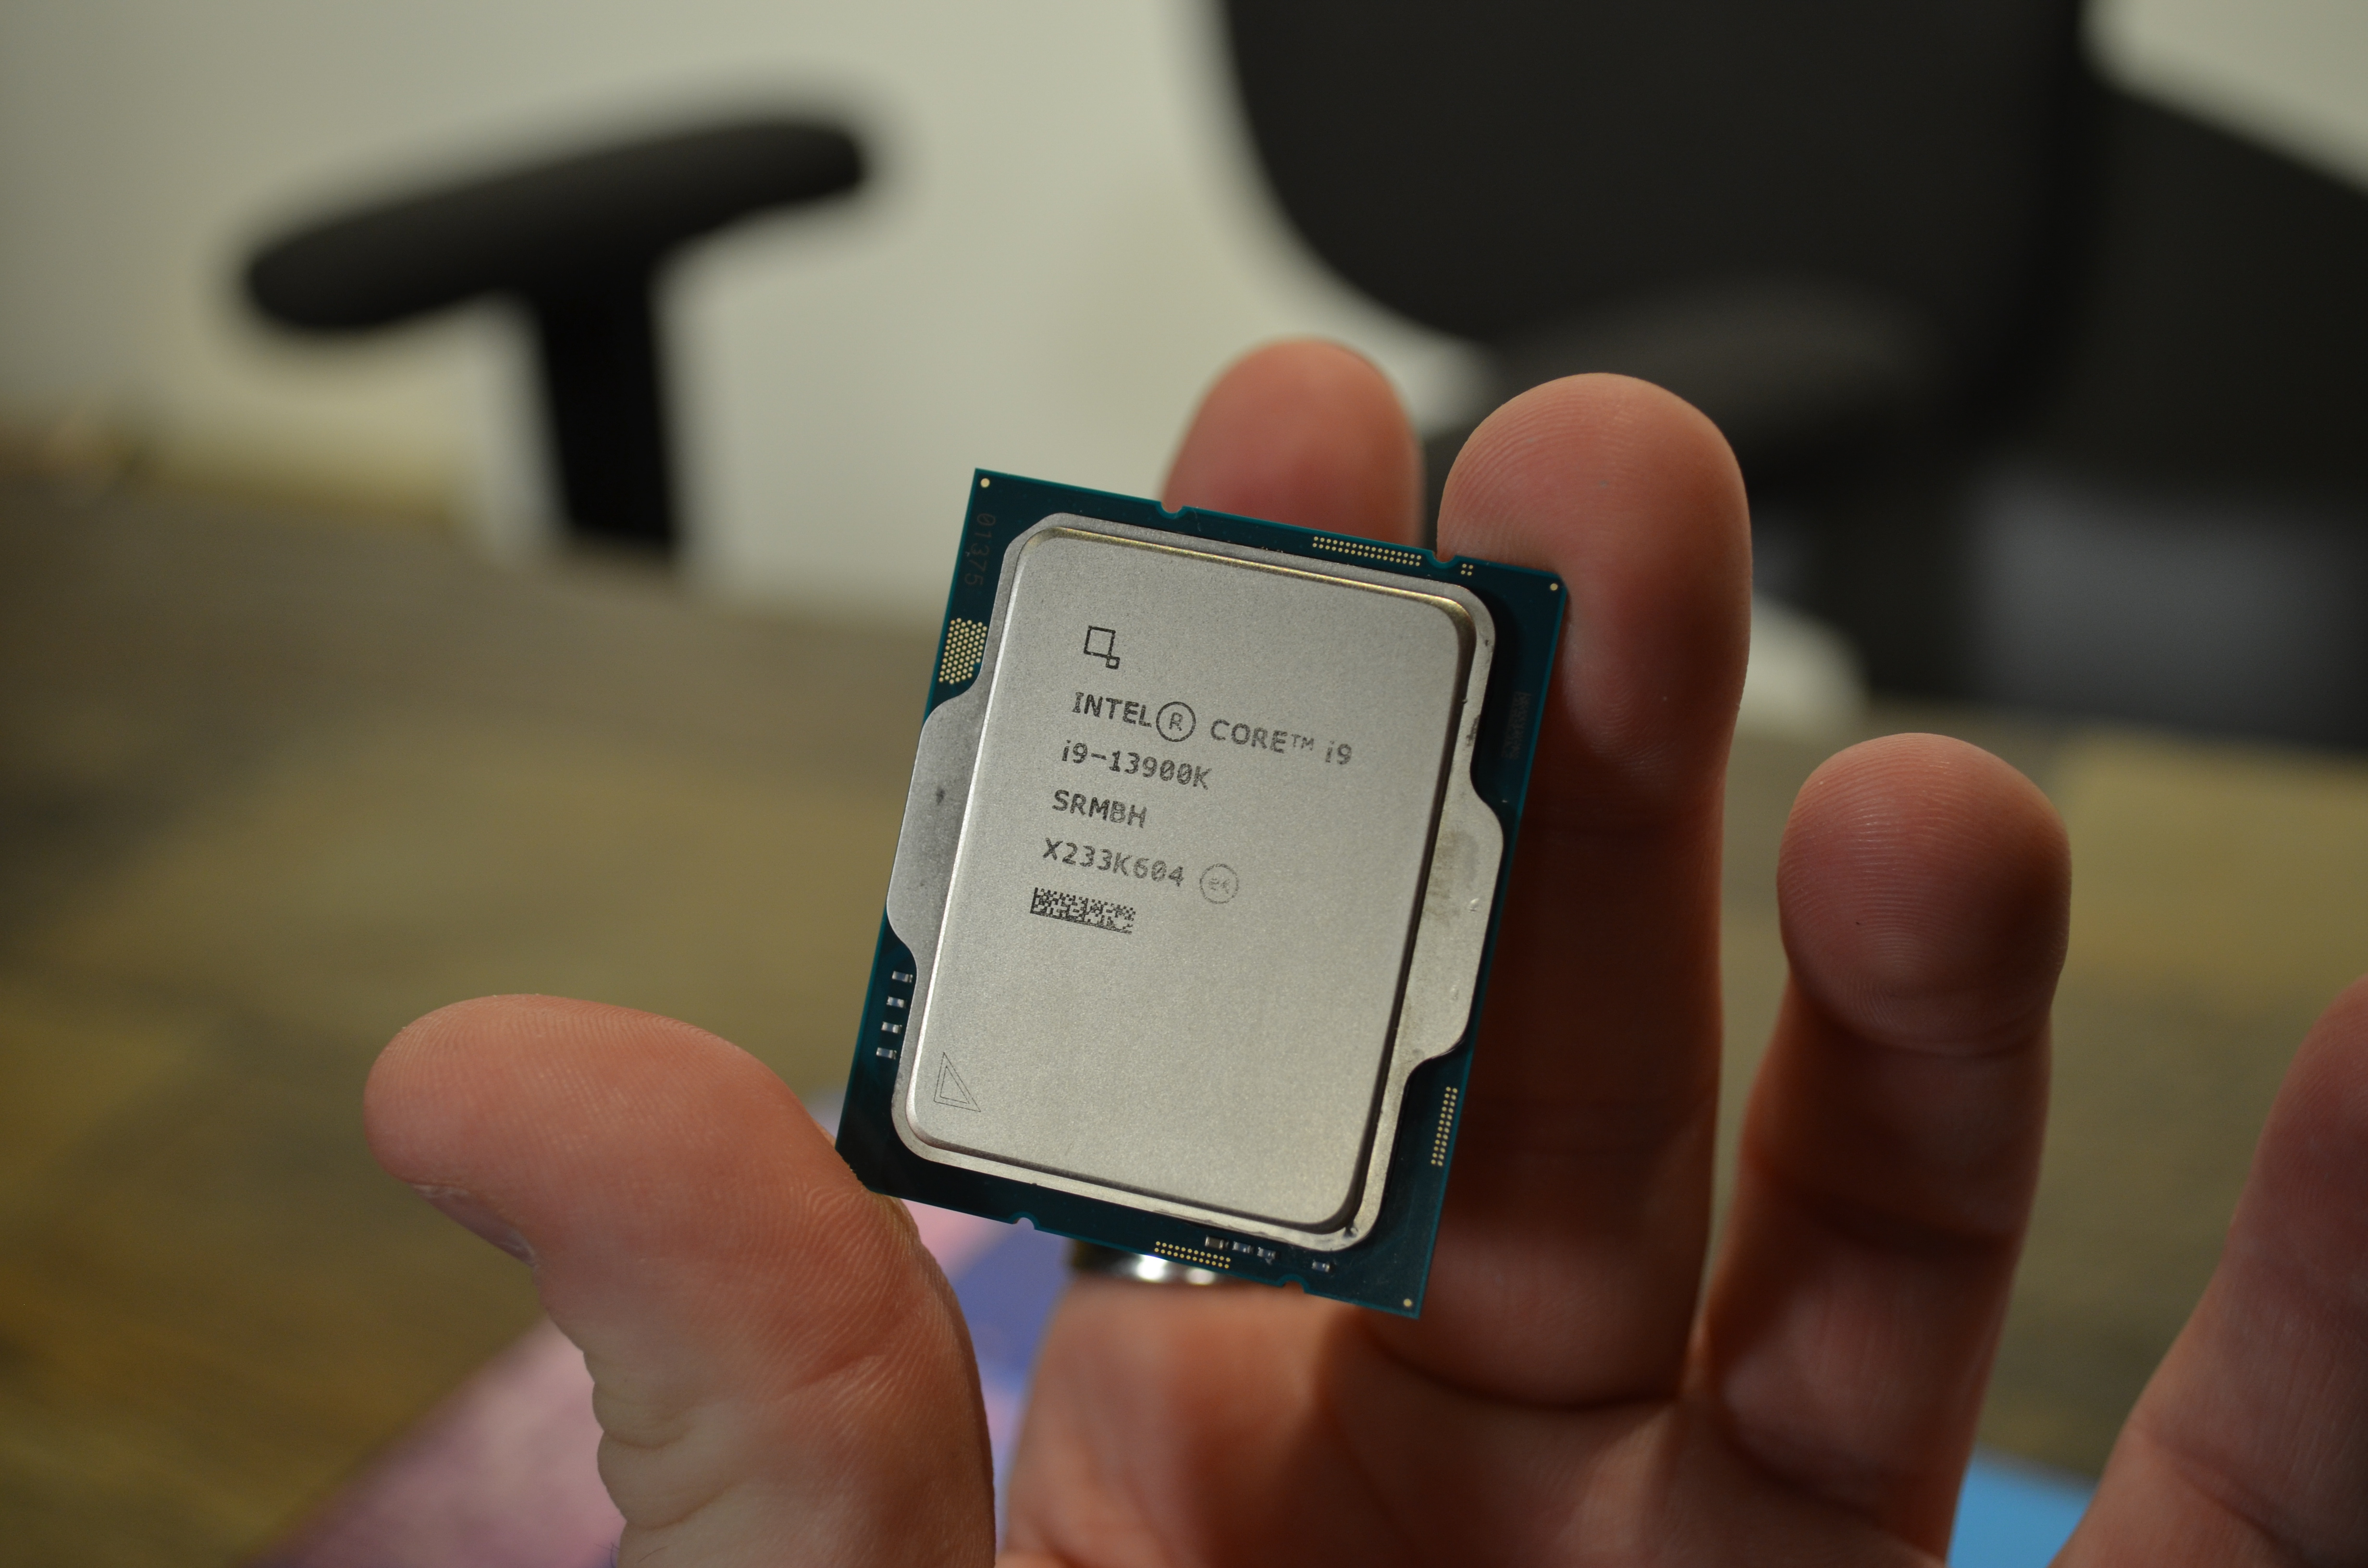 Intel's debut 6-core Core i9 CPUs could push gaming laptops past